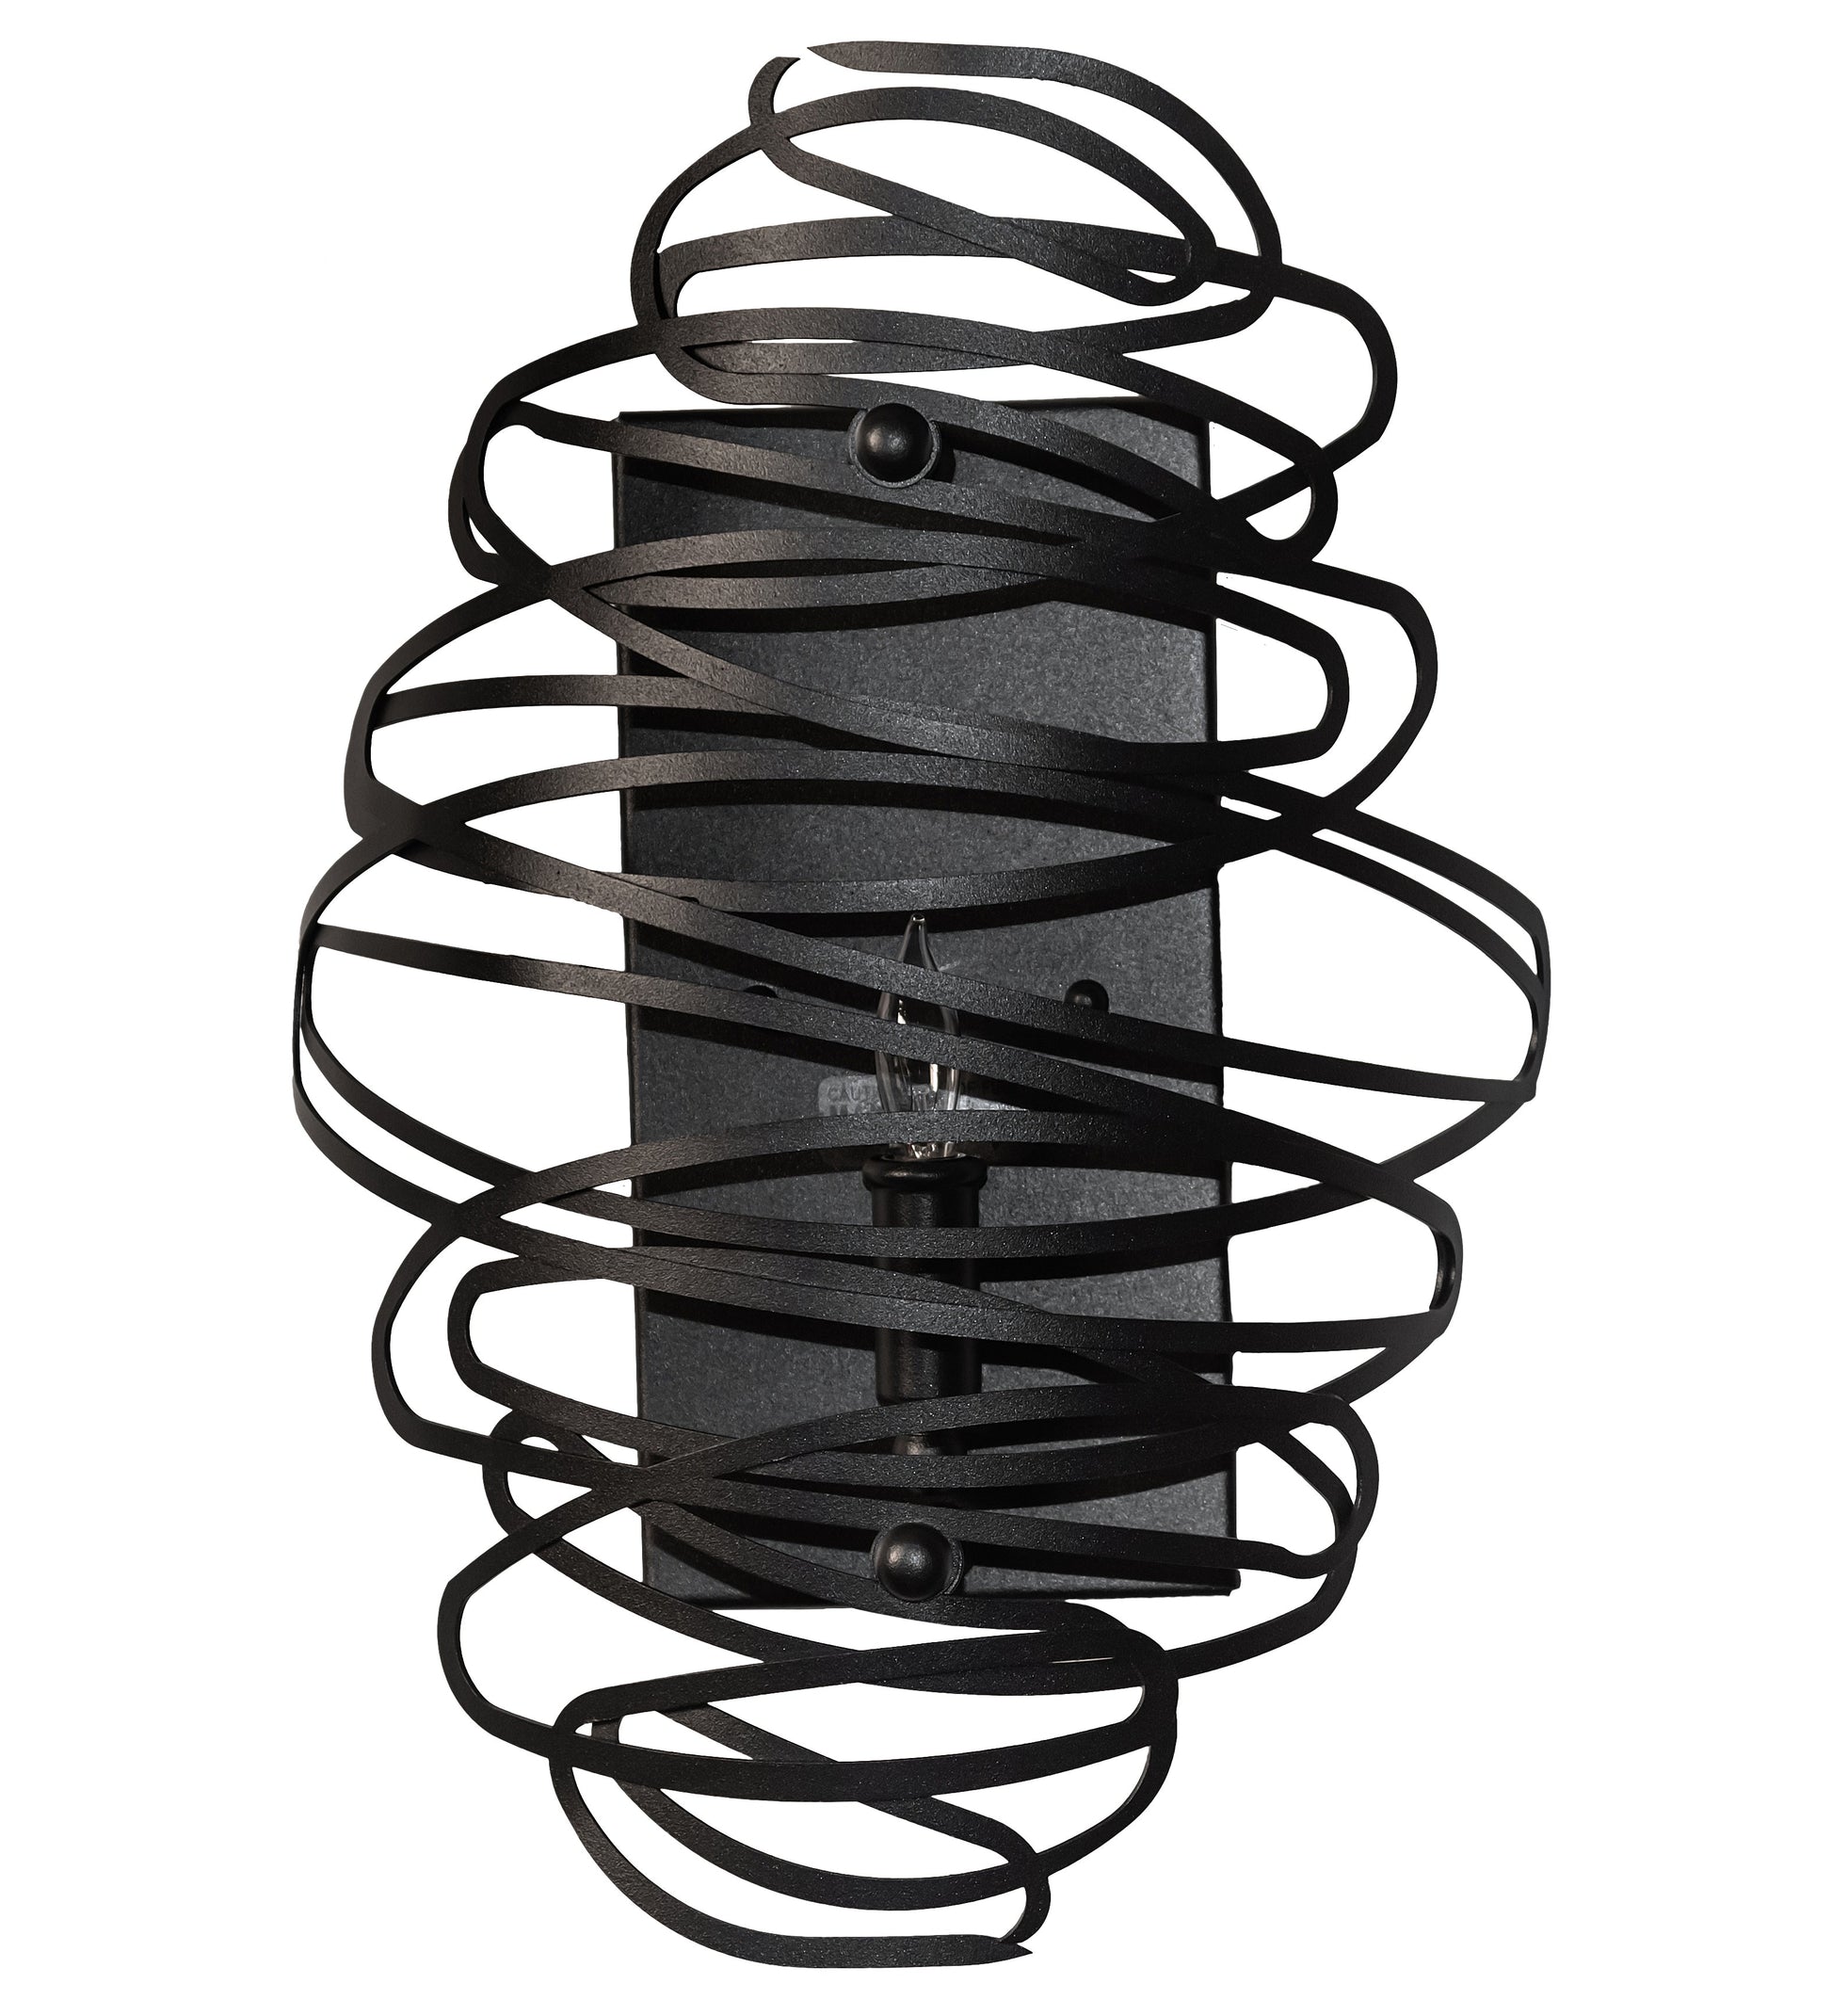 10" Cyclone Wall Sconce by 2nd Ave Lighting